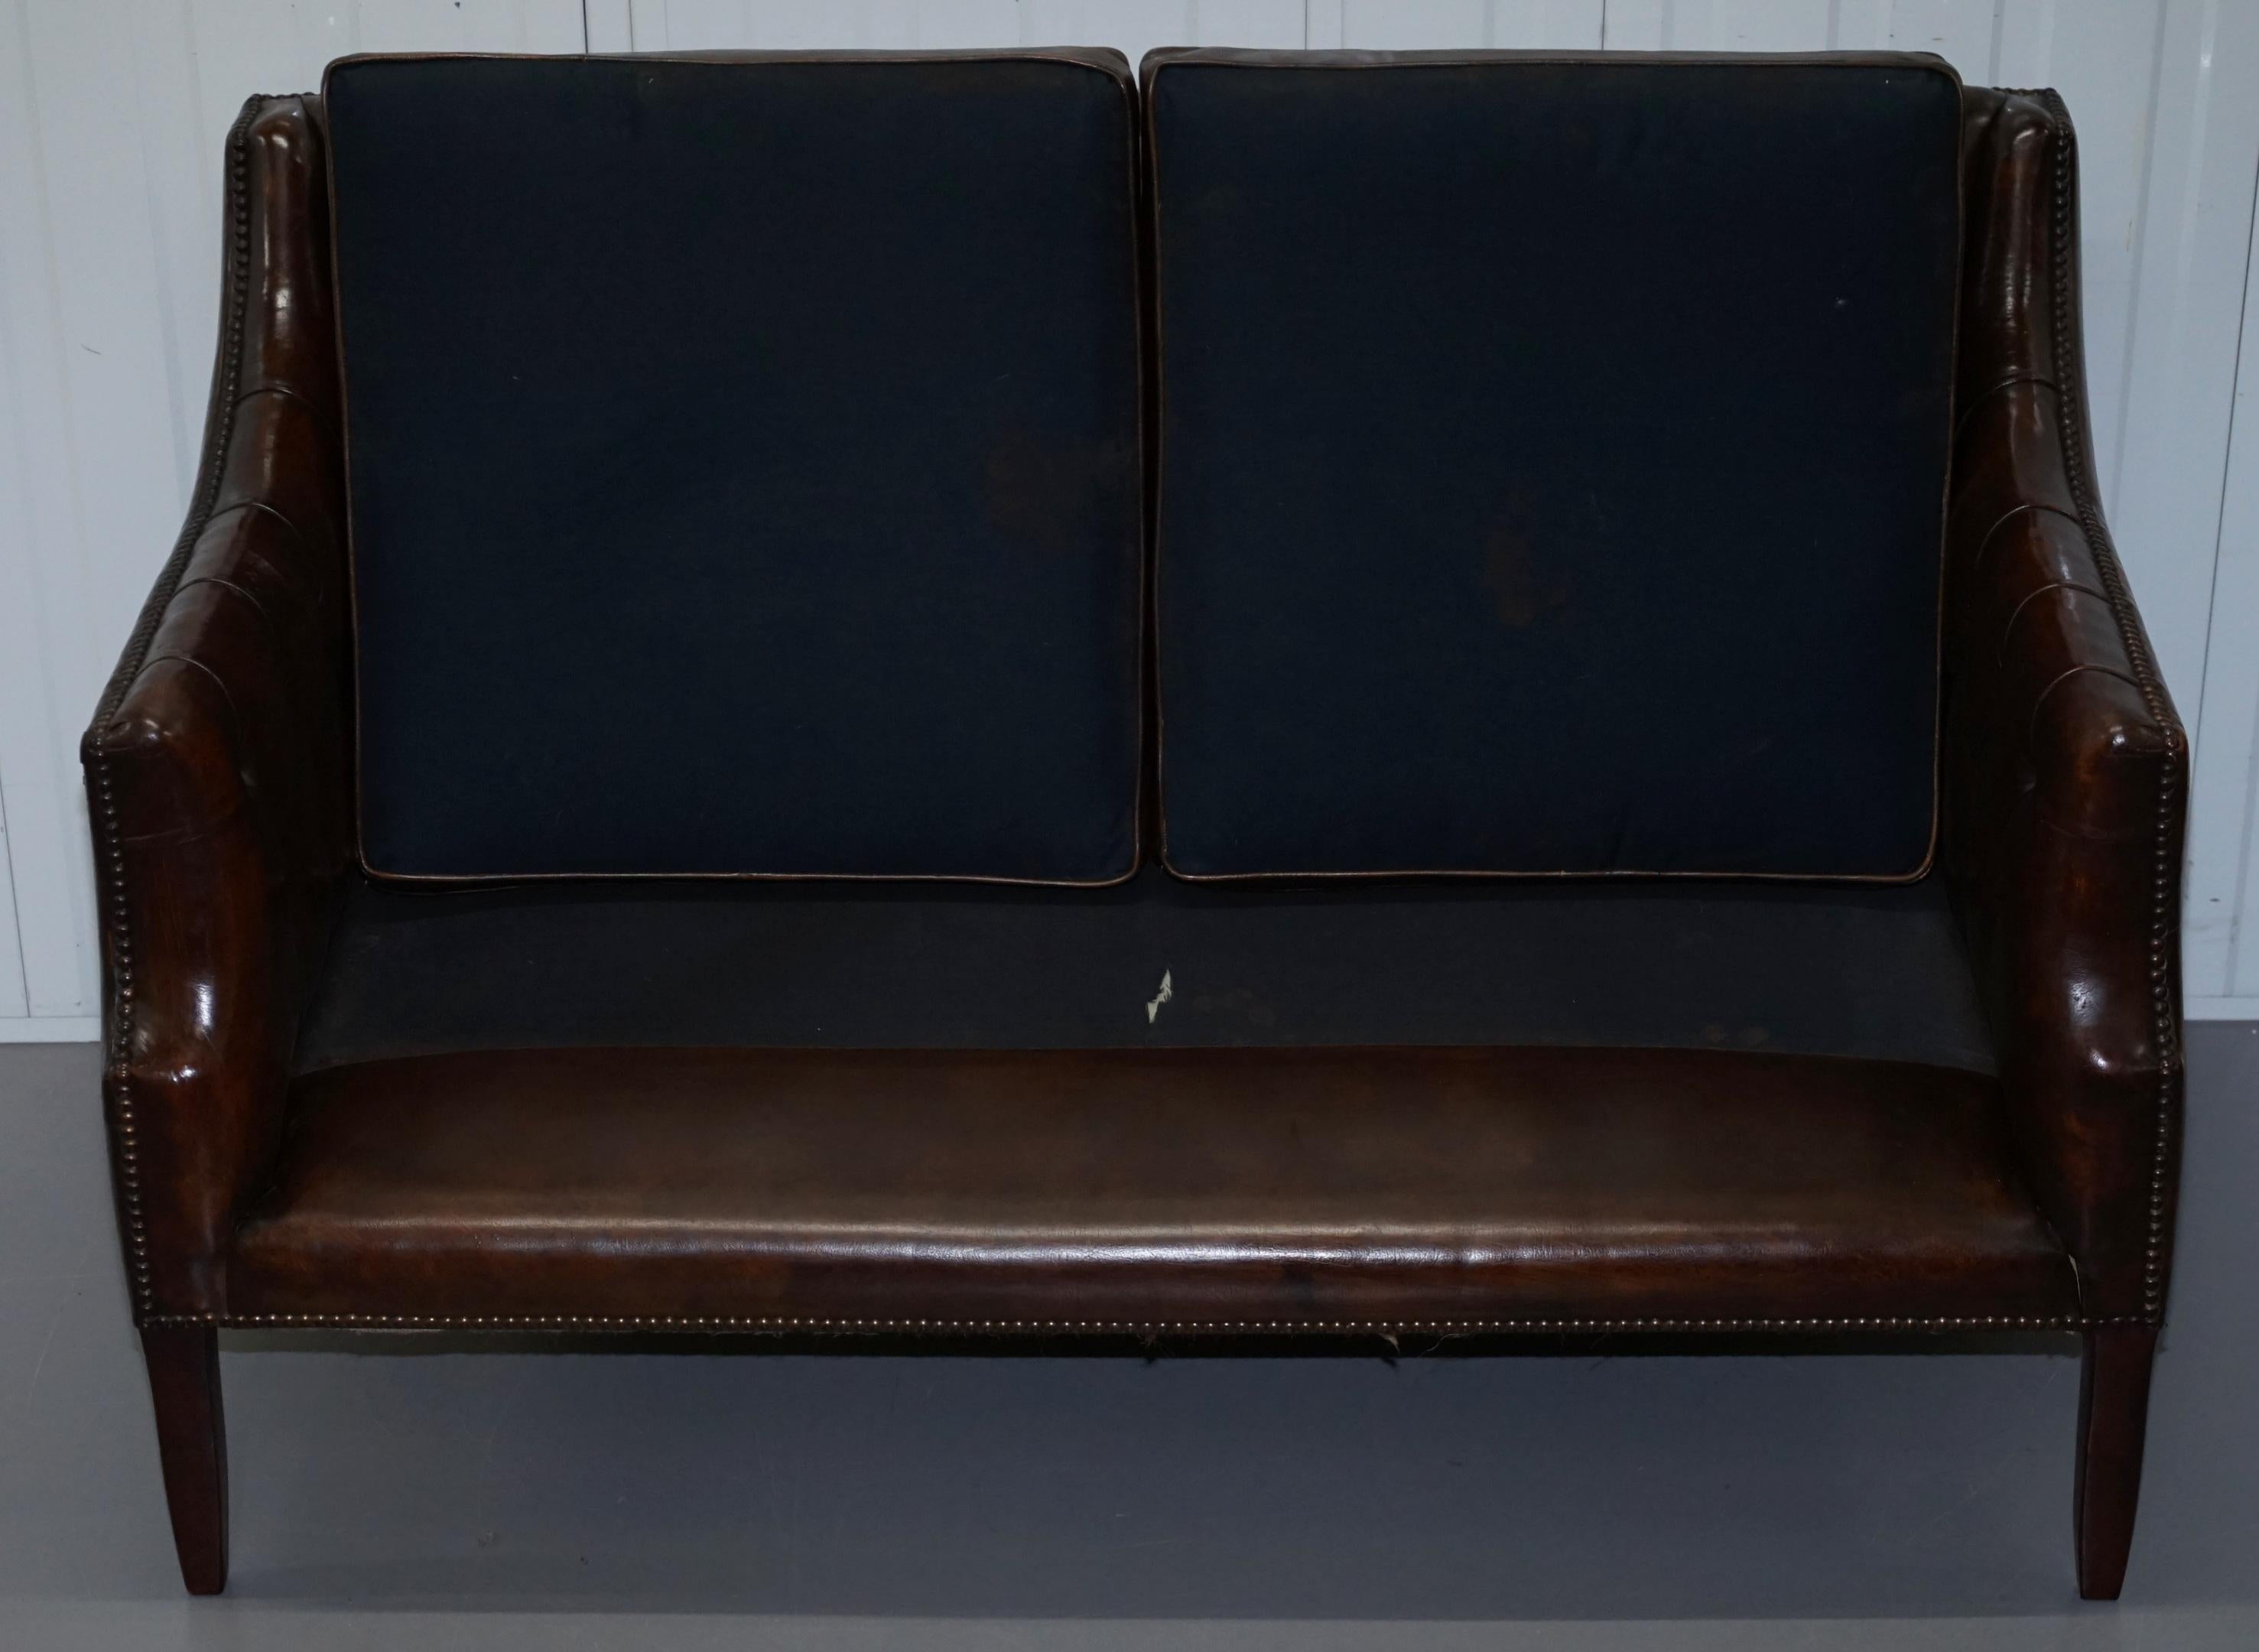 Restored Lutyen's Viceroy Chesterfield Brown Leather Two-Seat Sofa 7